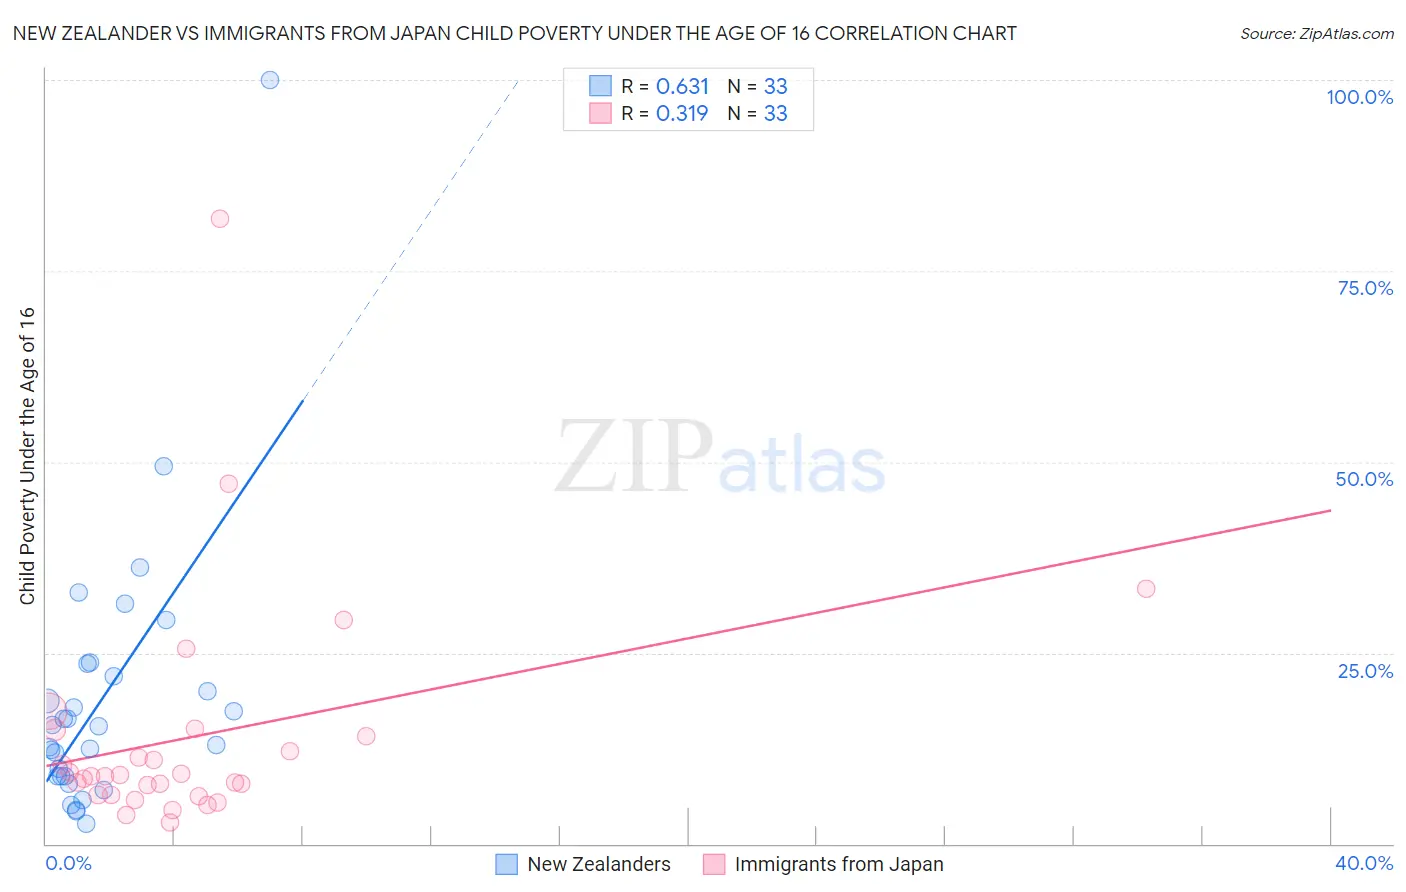 New Zealander vs Immigrants from Japan Child Poverty Under the Age of 16